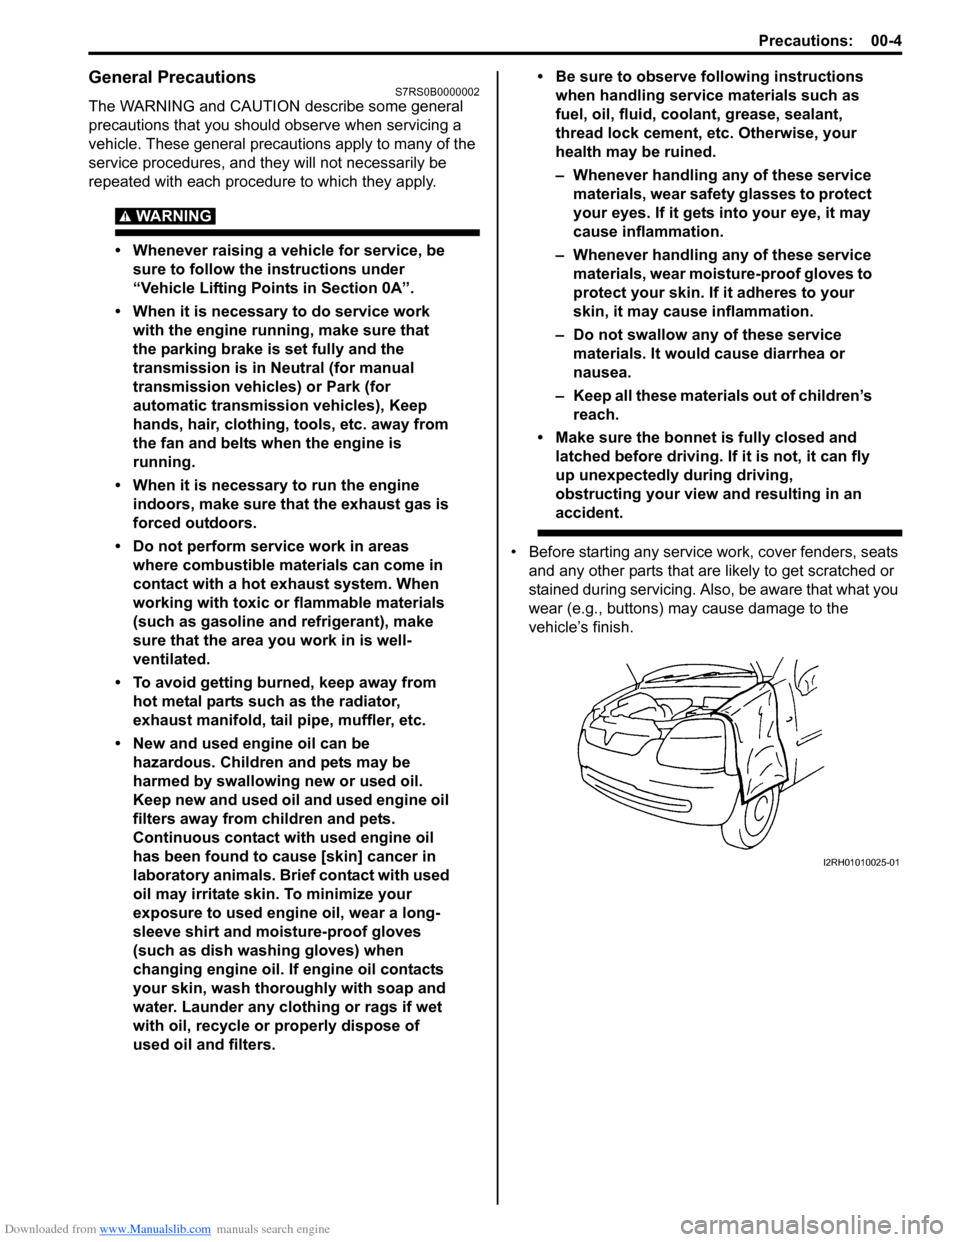 SUZUKI SWIFT 2005 2.G Service Workshop Manual Downloaded from www.Manualslib.com manuals search engine Precautions: 00-4
General PrecautionsS7RS0B0000002
The WARNING and CAUTION describe some general 
precautions that you should observe when serv